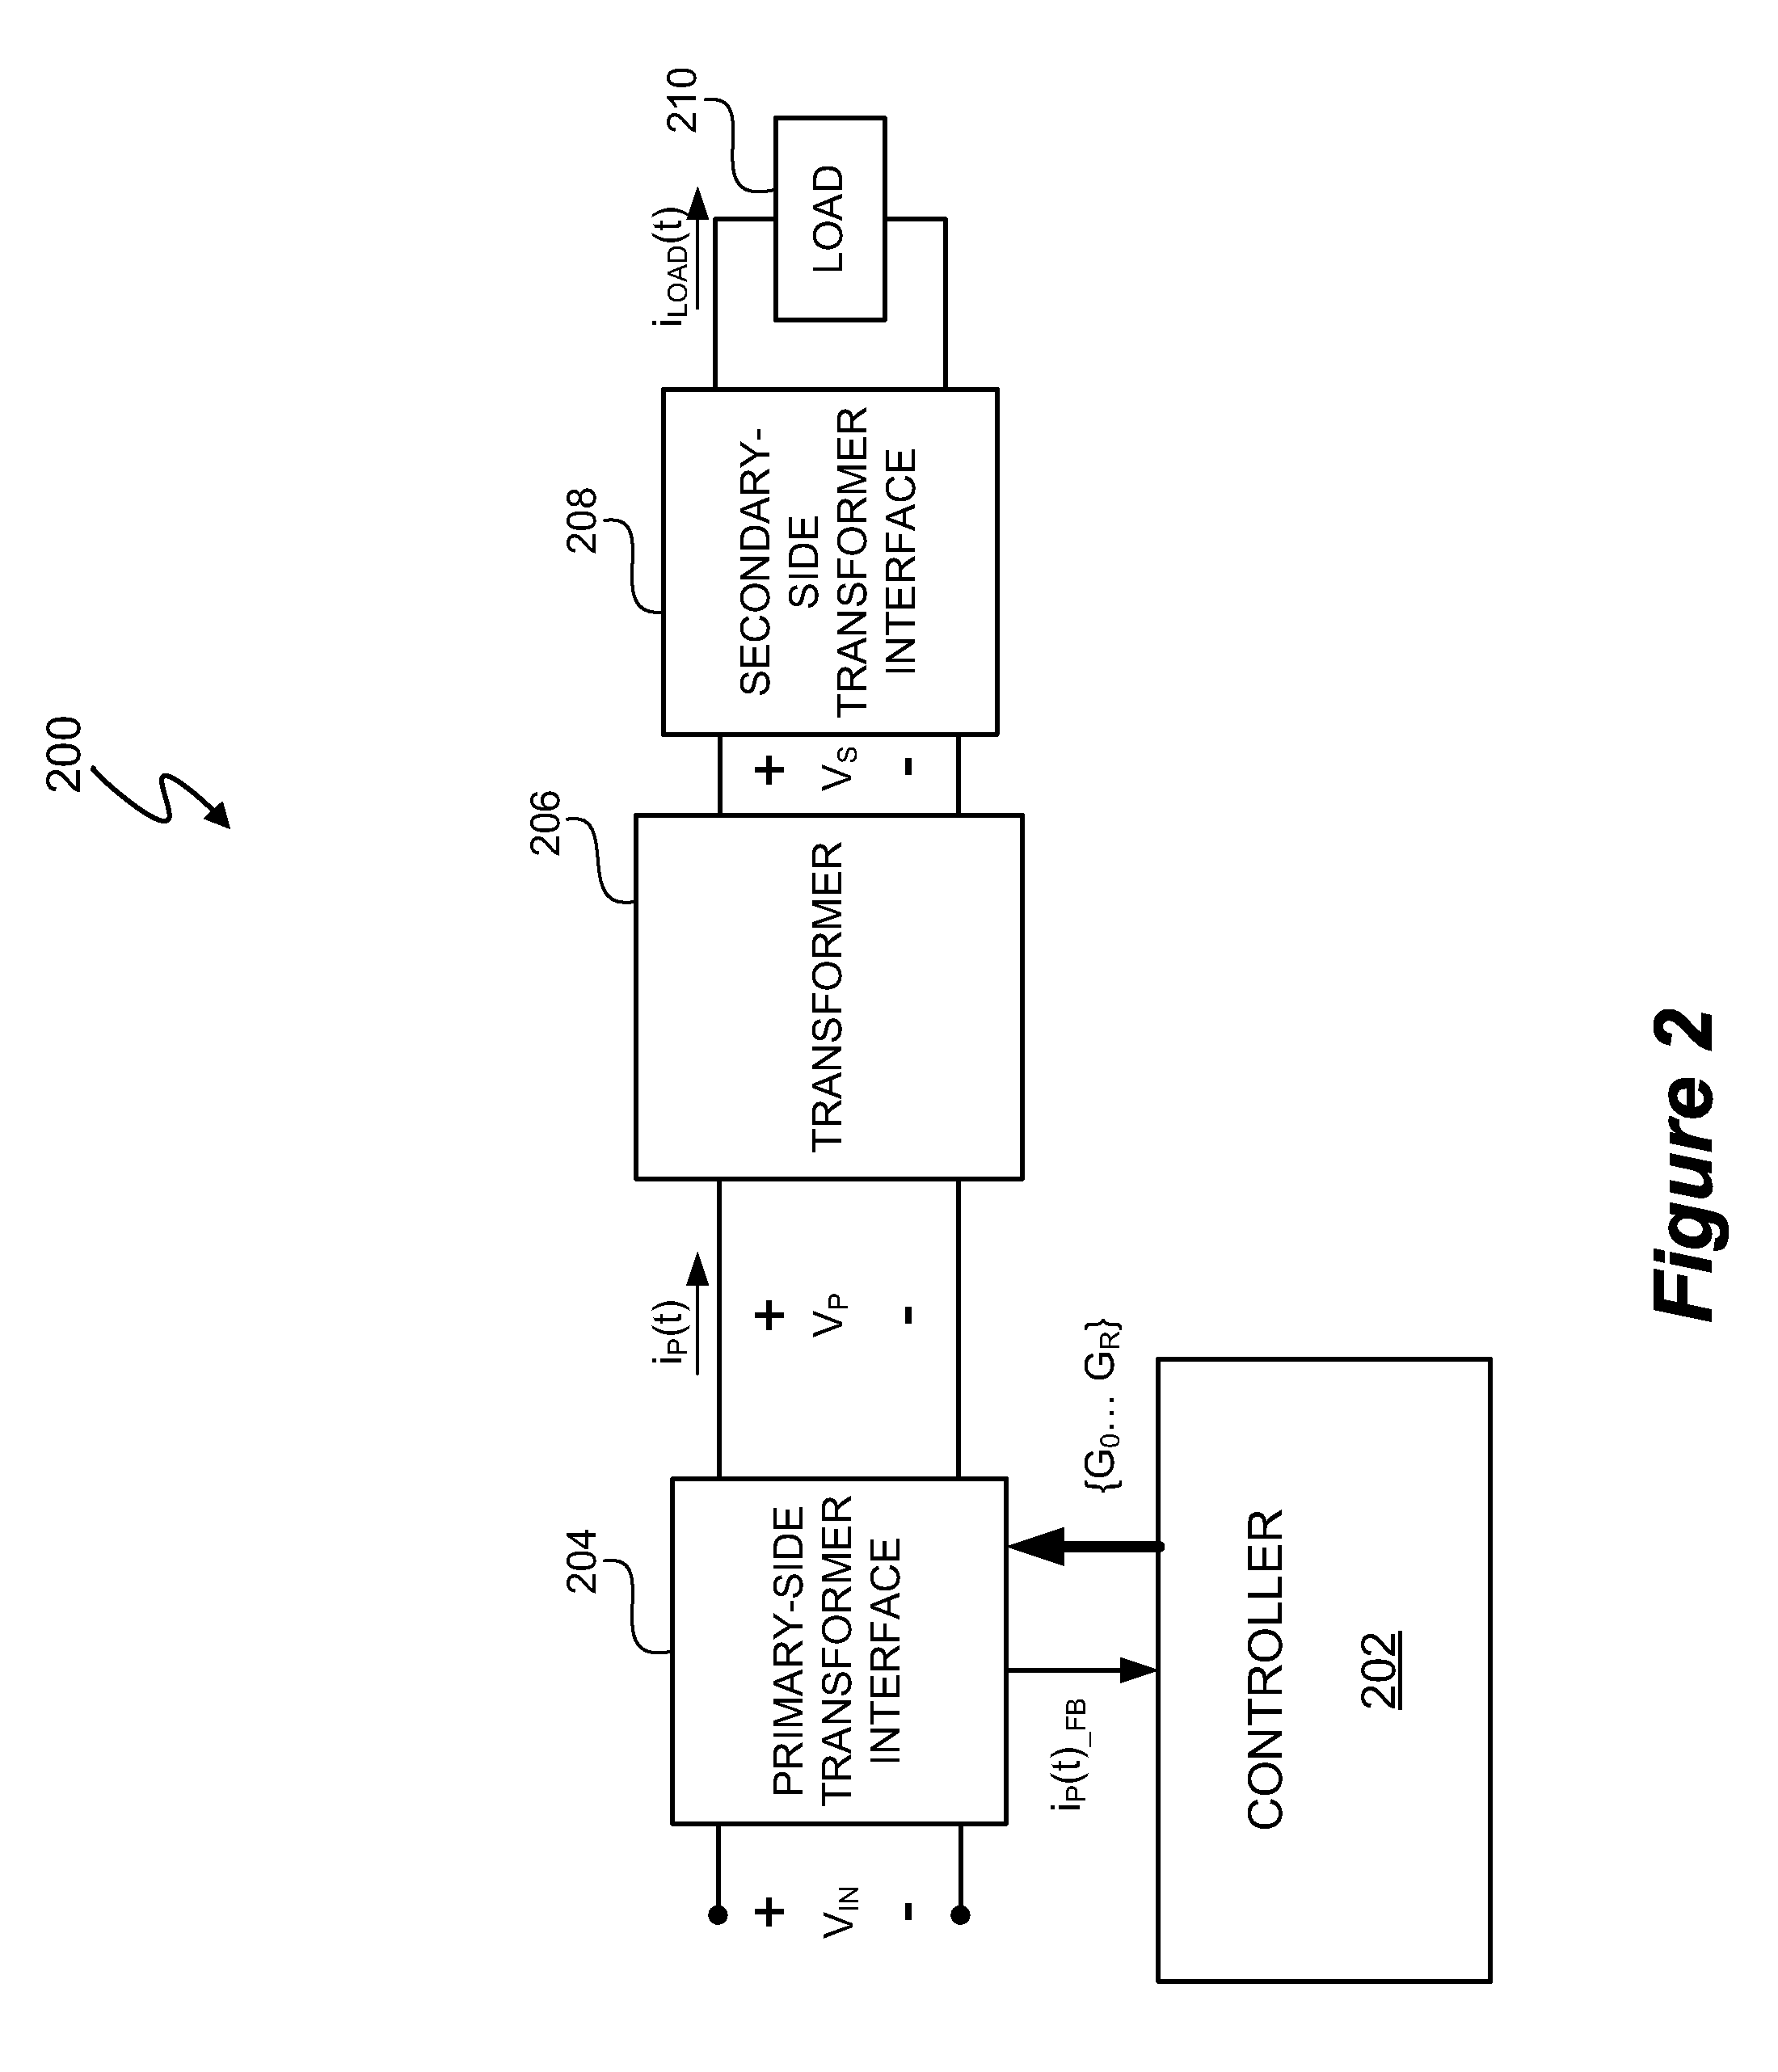 Primary-side based control of secondary-side current for a transformer